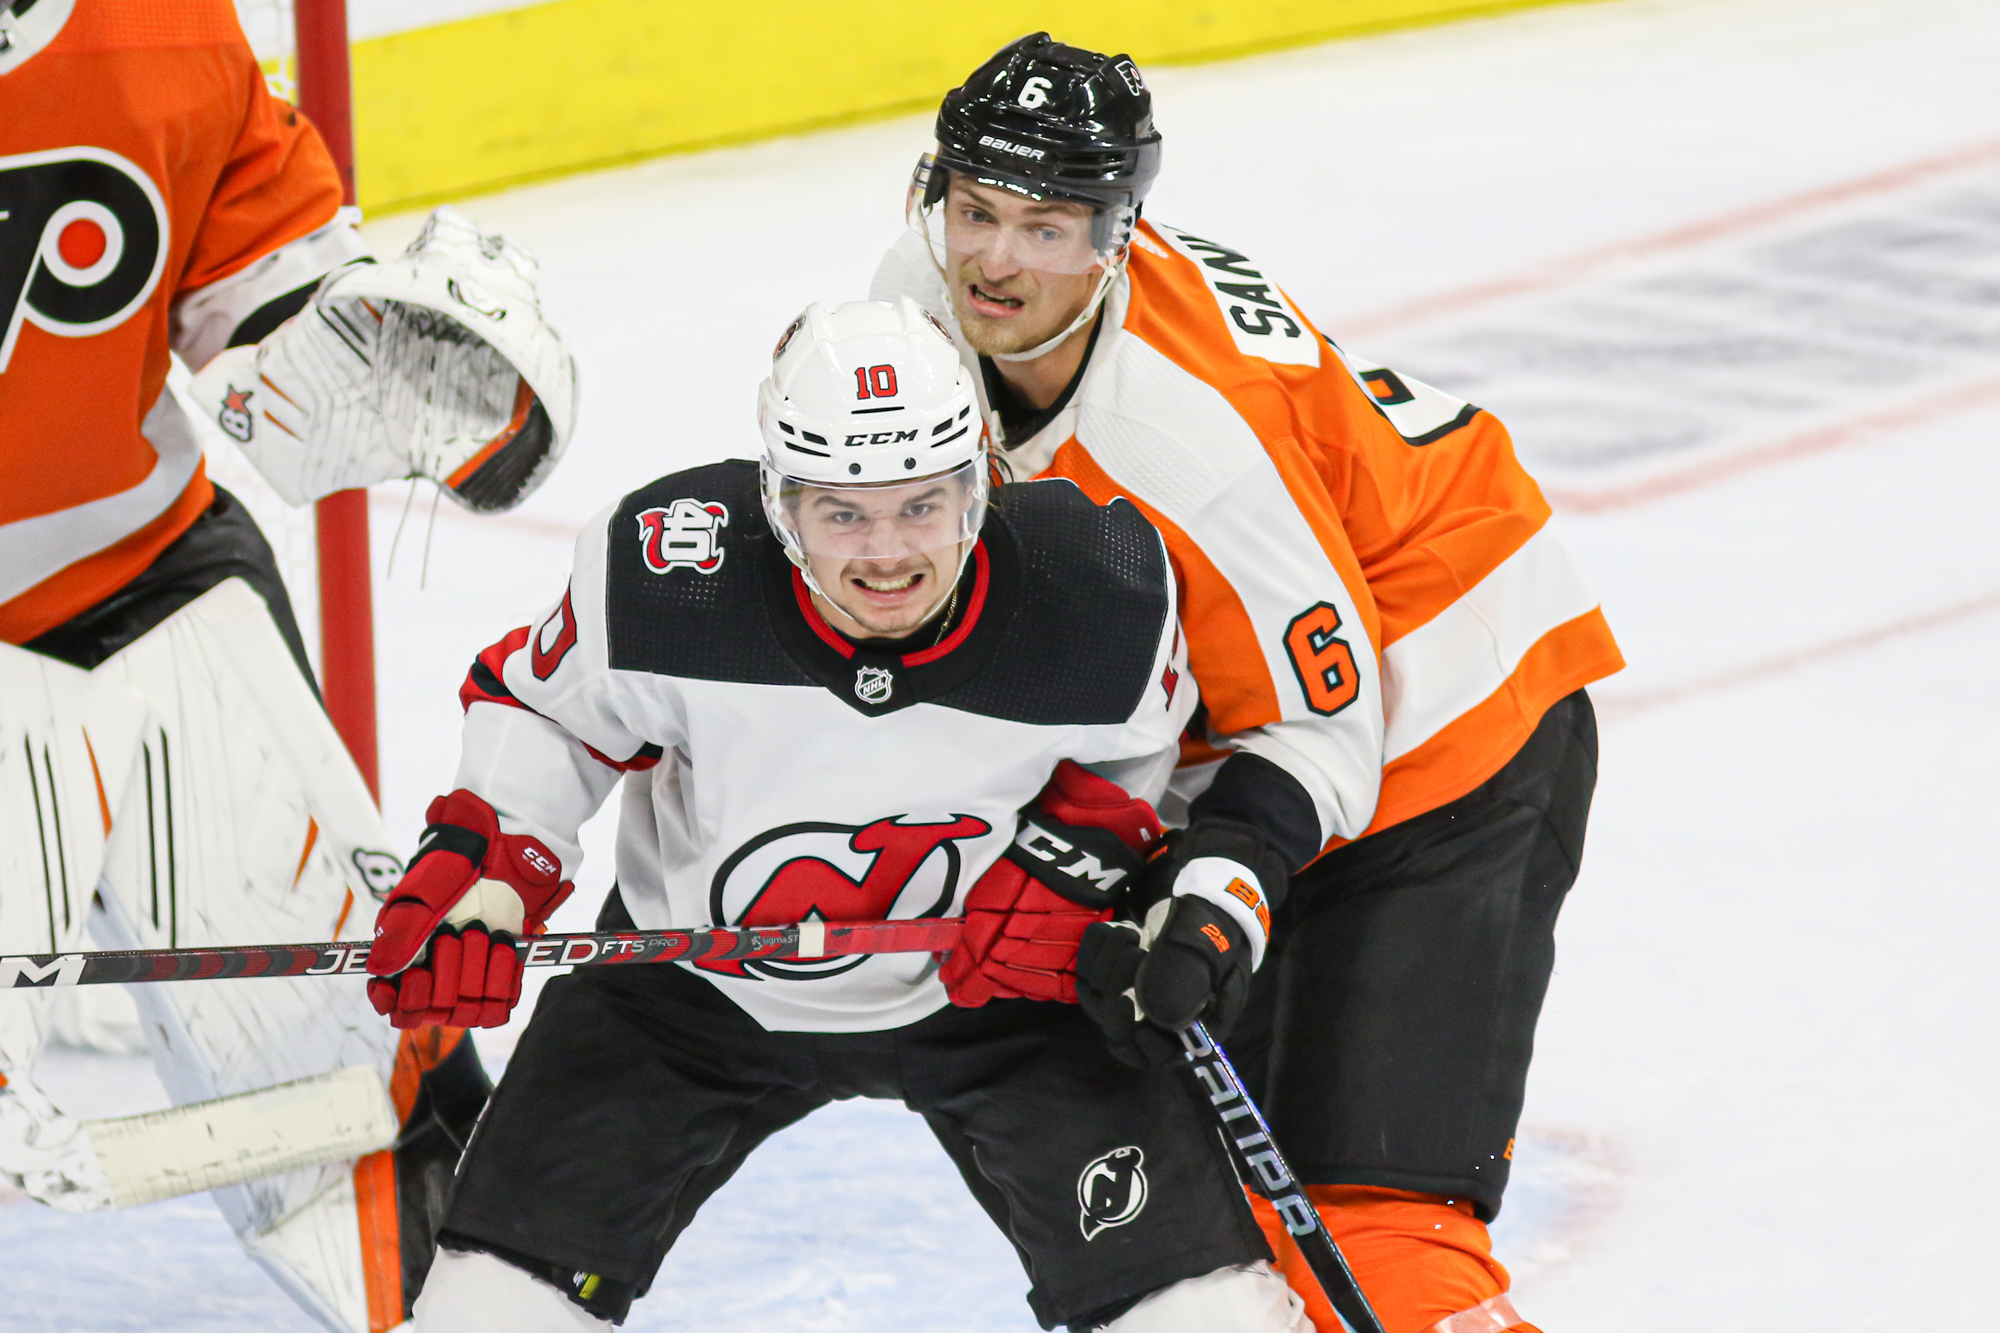 Flyers lose 10th straight as Blackwood, Devils get shutout – Delco